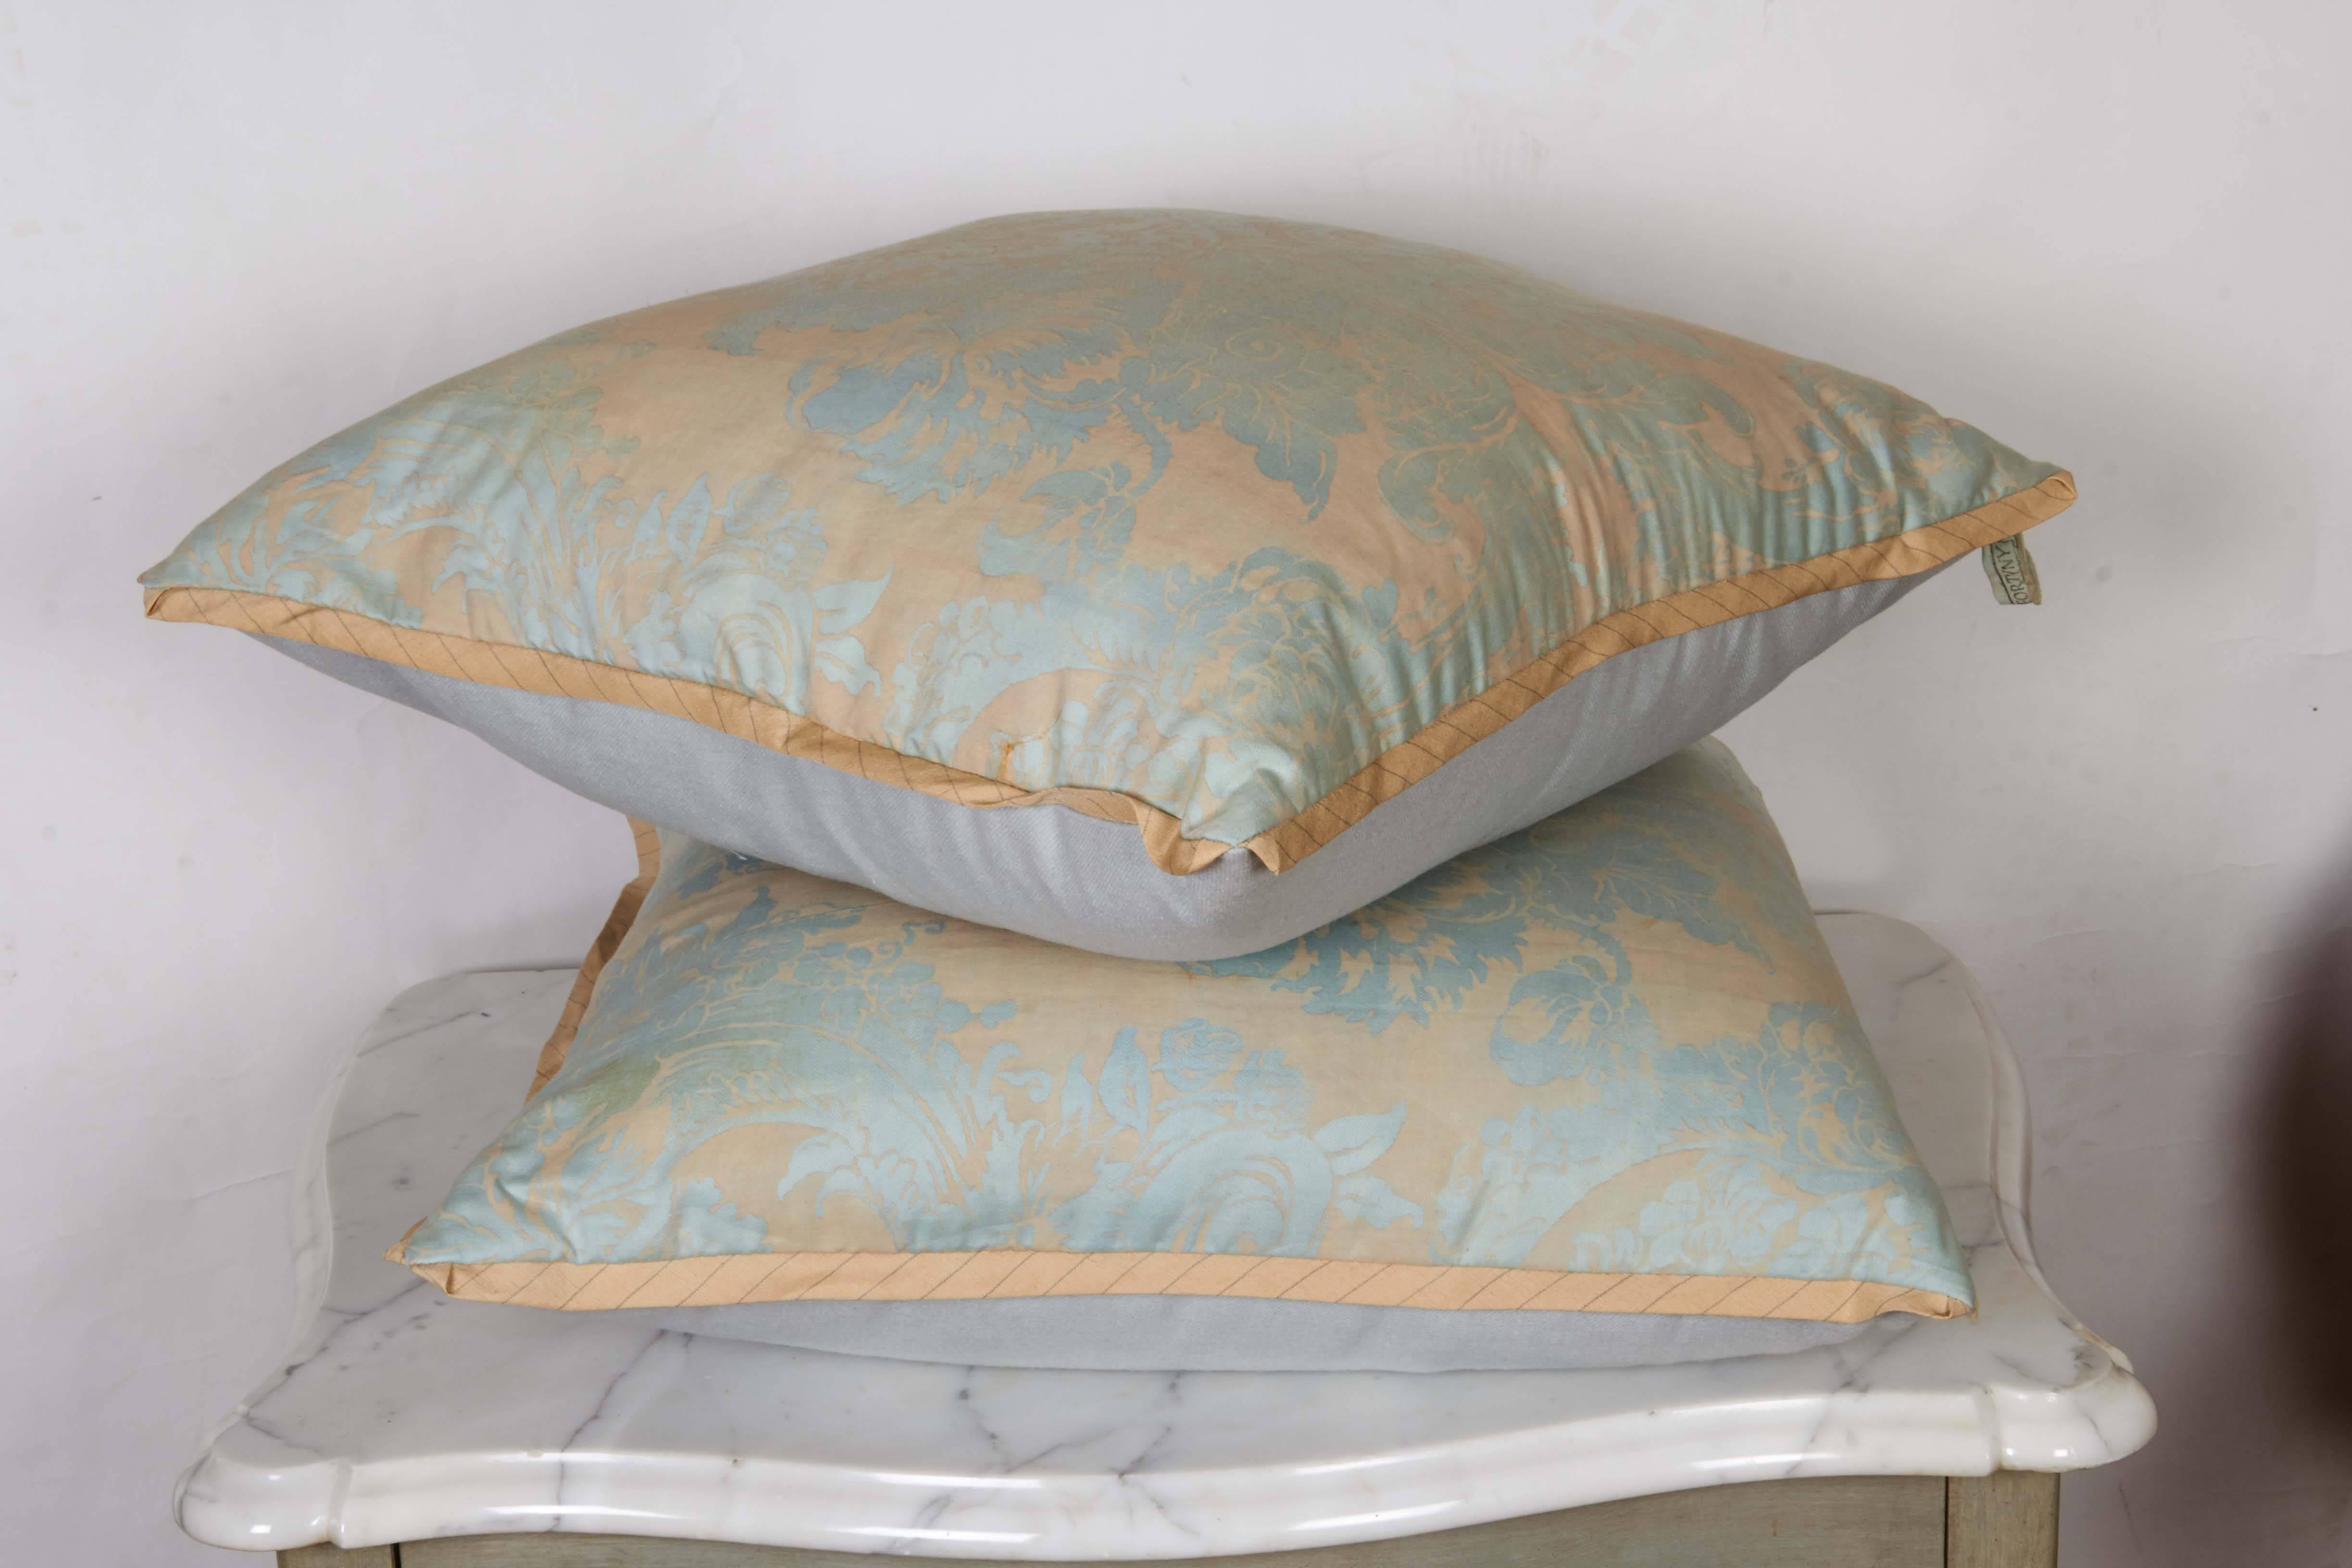 Rococo Set of Fortuny Fabric Cushions in the Dandolo Pattern